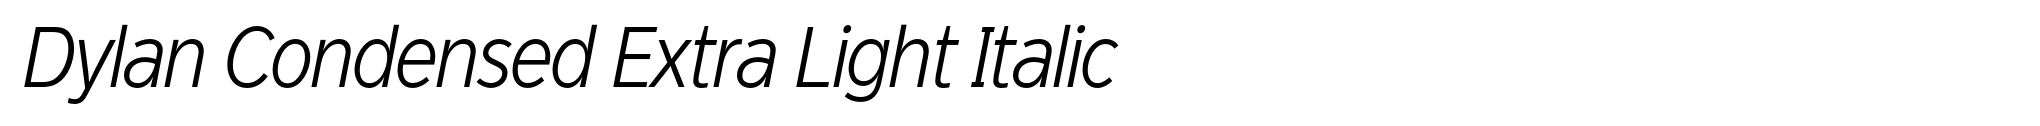 Dylan Condensed Extra Light Italic image